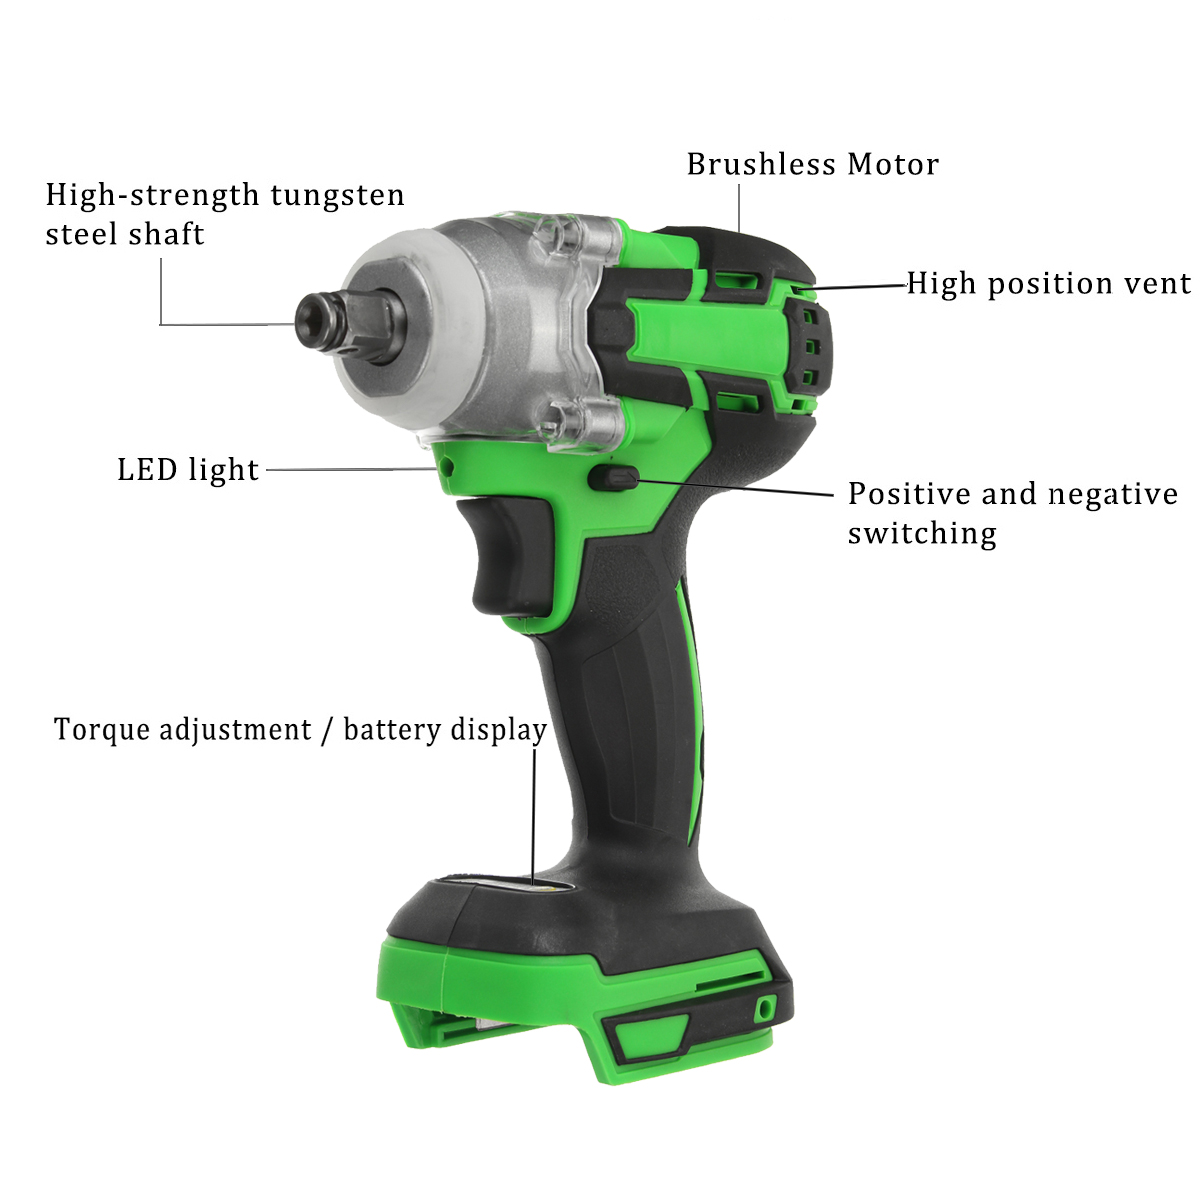 520NM-Torque-Brushless-Impact-Wrench-Screwdriver-Cordless-Rechargable-Electric-Wrench-Driver-Tool-St-1610036-5